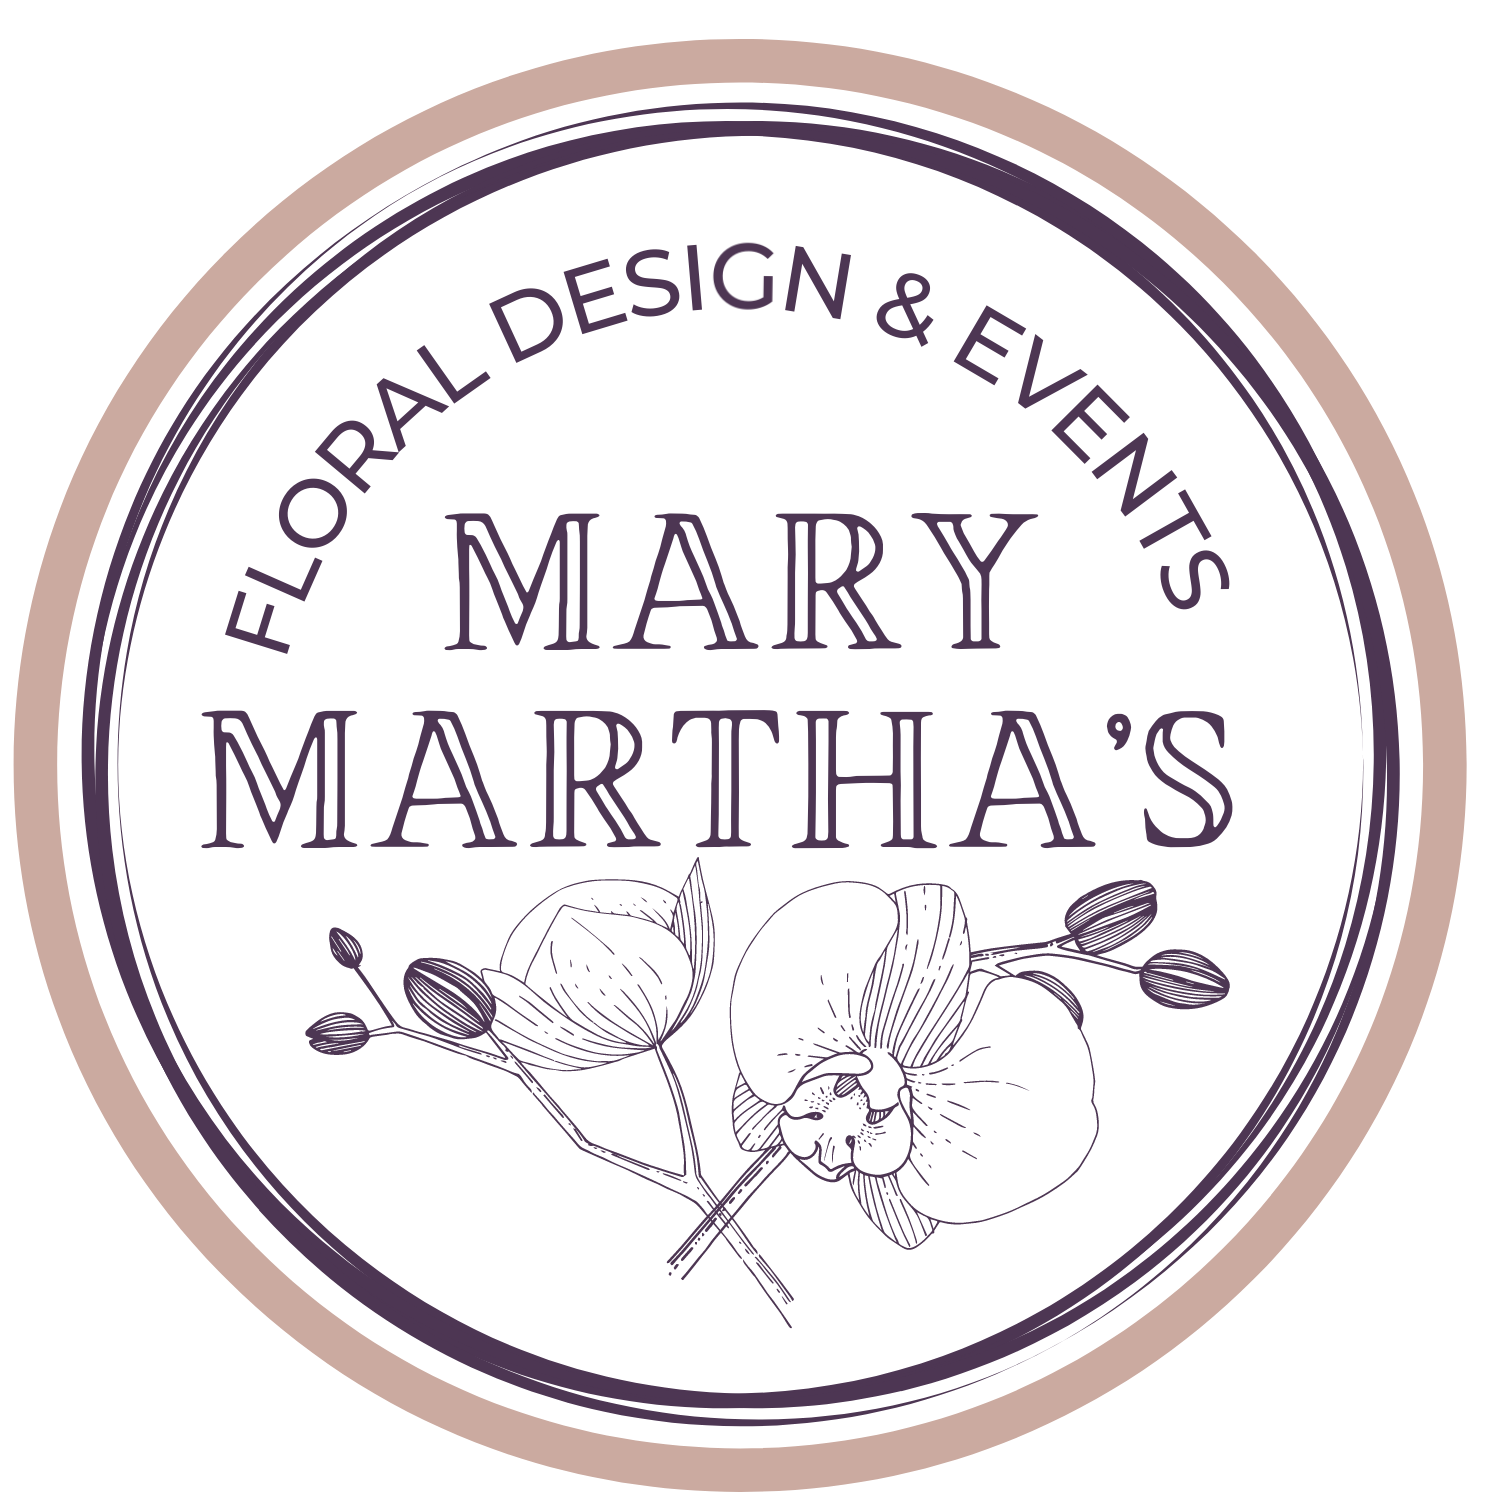 MARY MARTHA’S FLORAL DESIGN & EVENTS